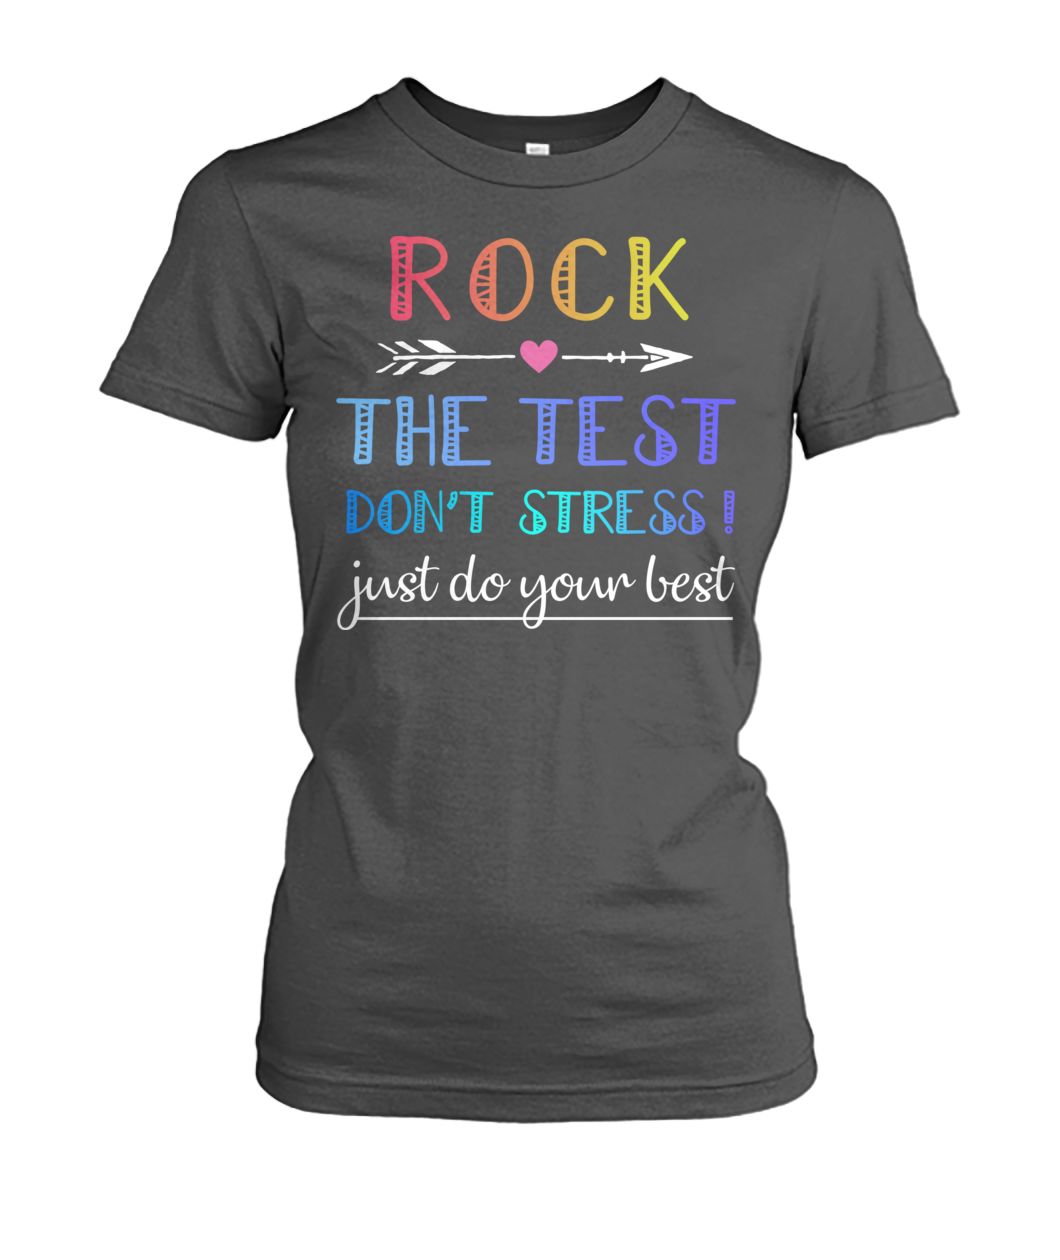 Rock the test don't stress just do your best women's crew tee